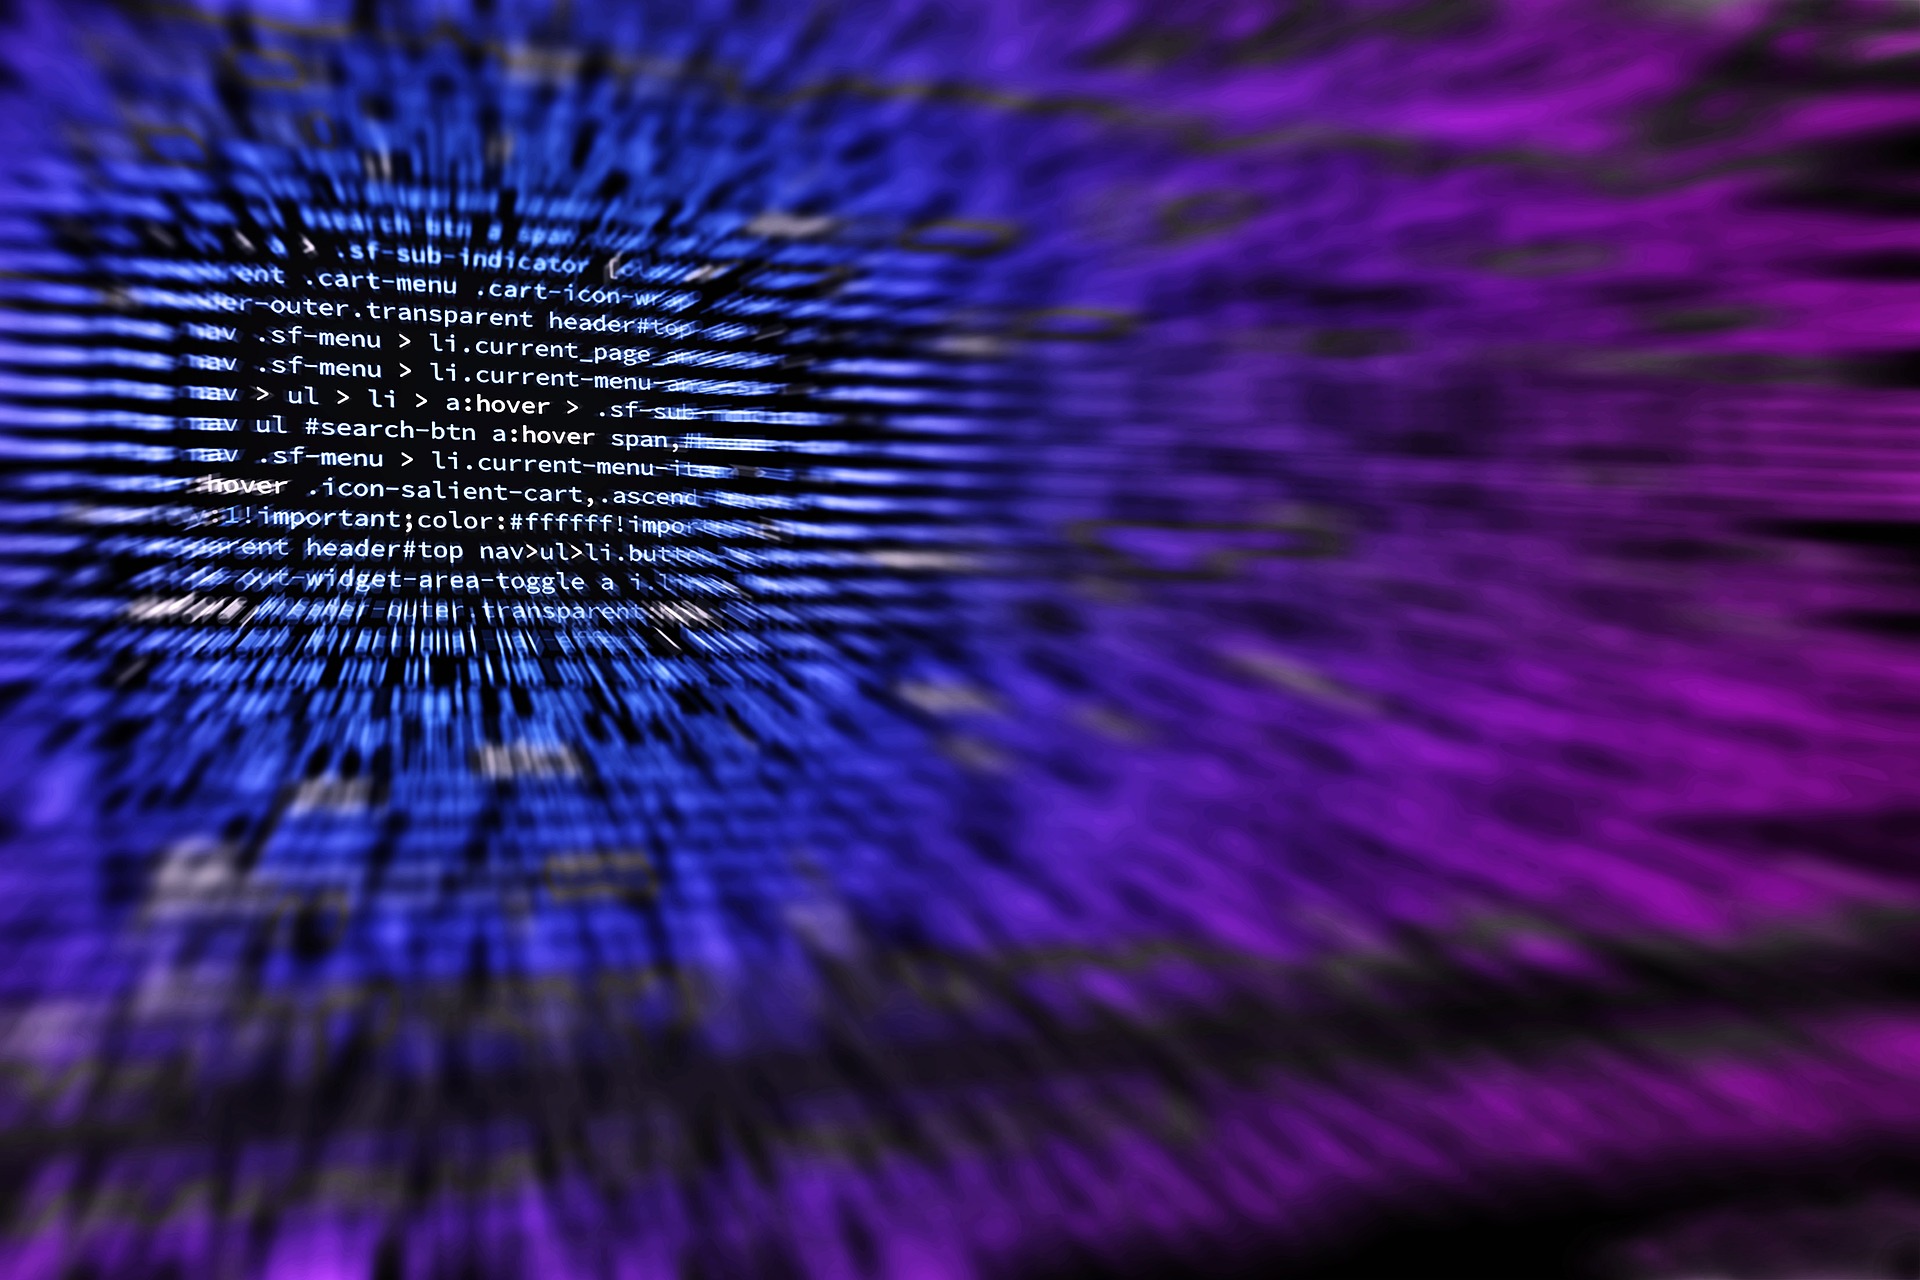 HTML code on a computer screen surrounded by purple light